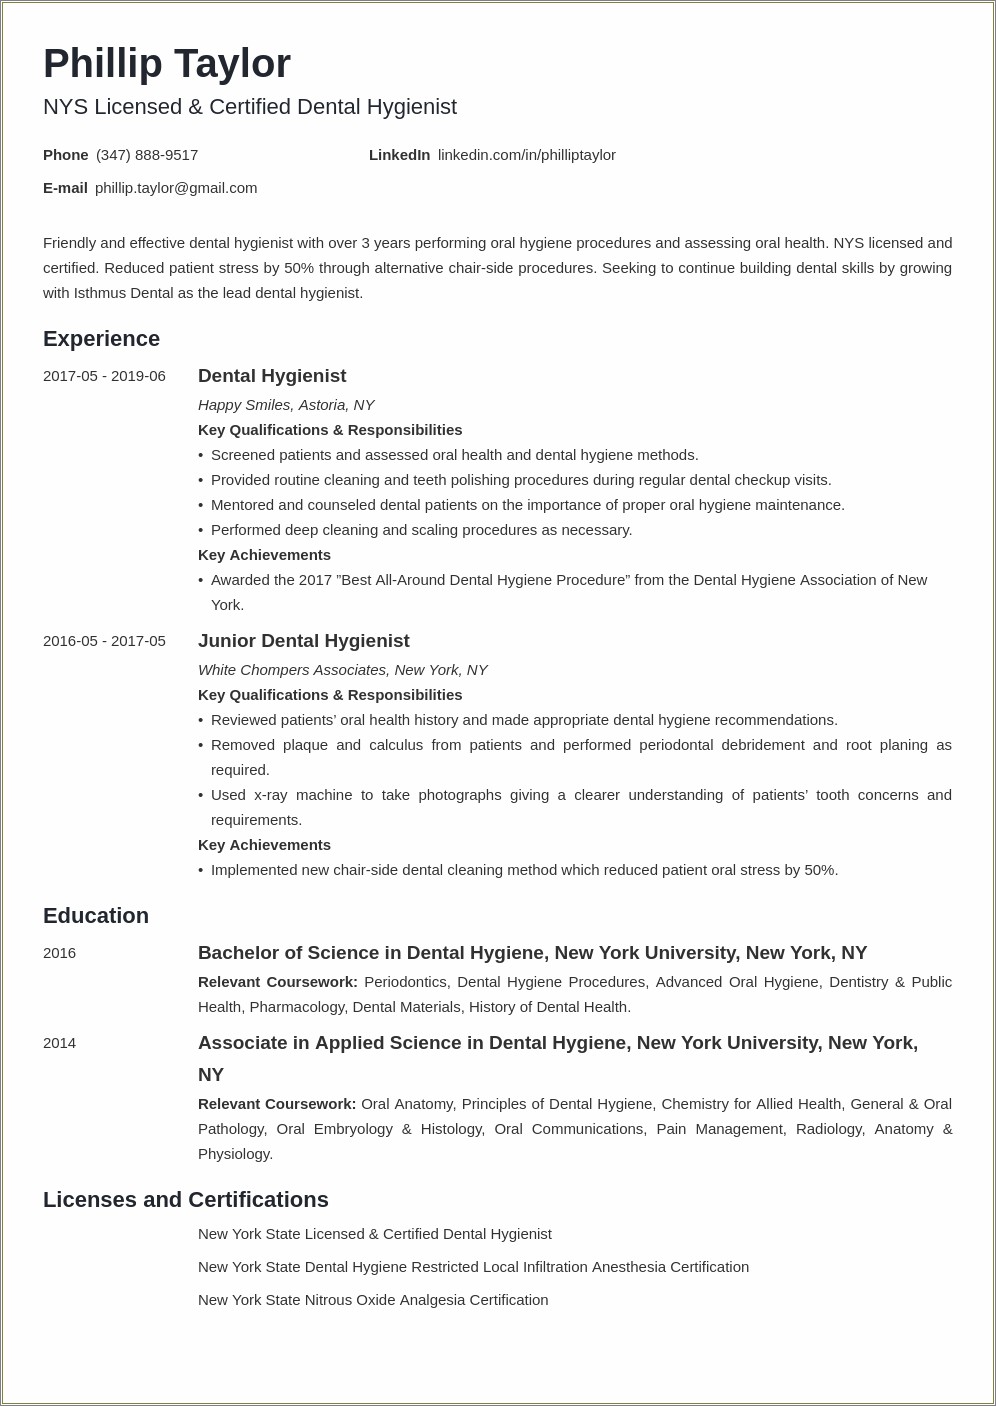 Example Of A Nursing And Dental Hygiene Resume